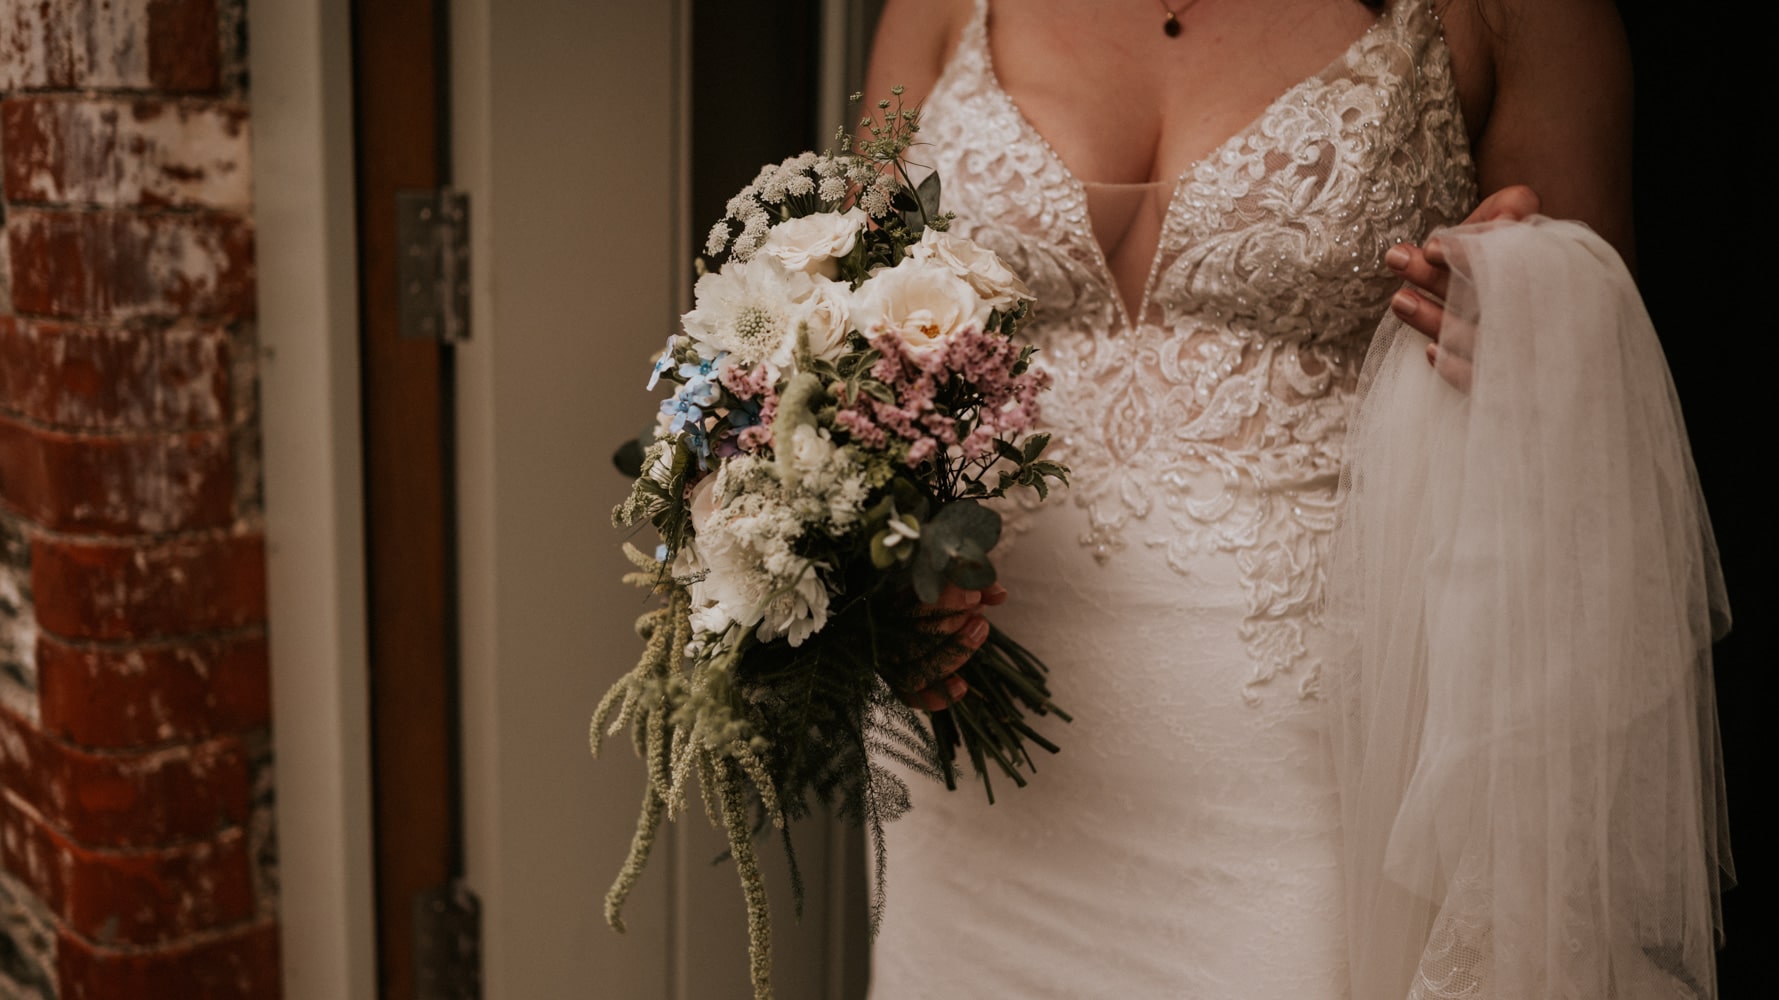 Lucy bride with bouquet, ready to get married